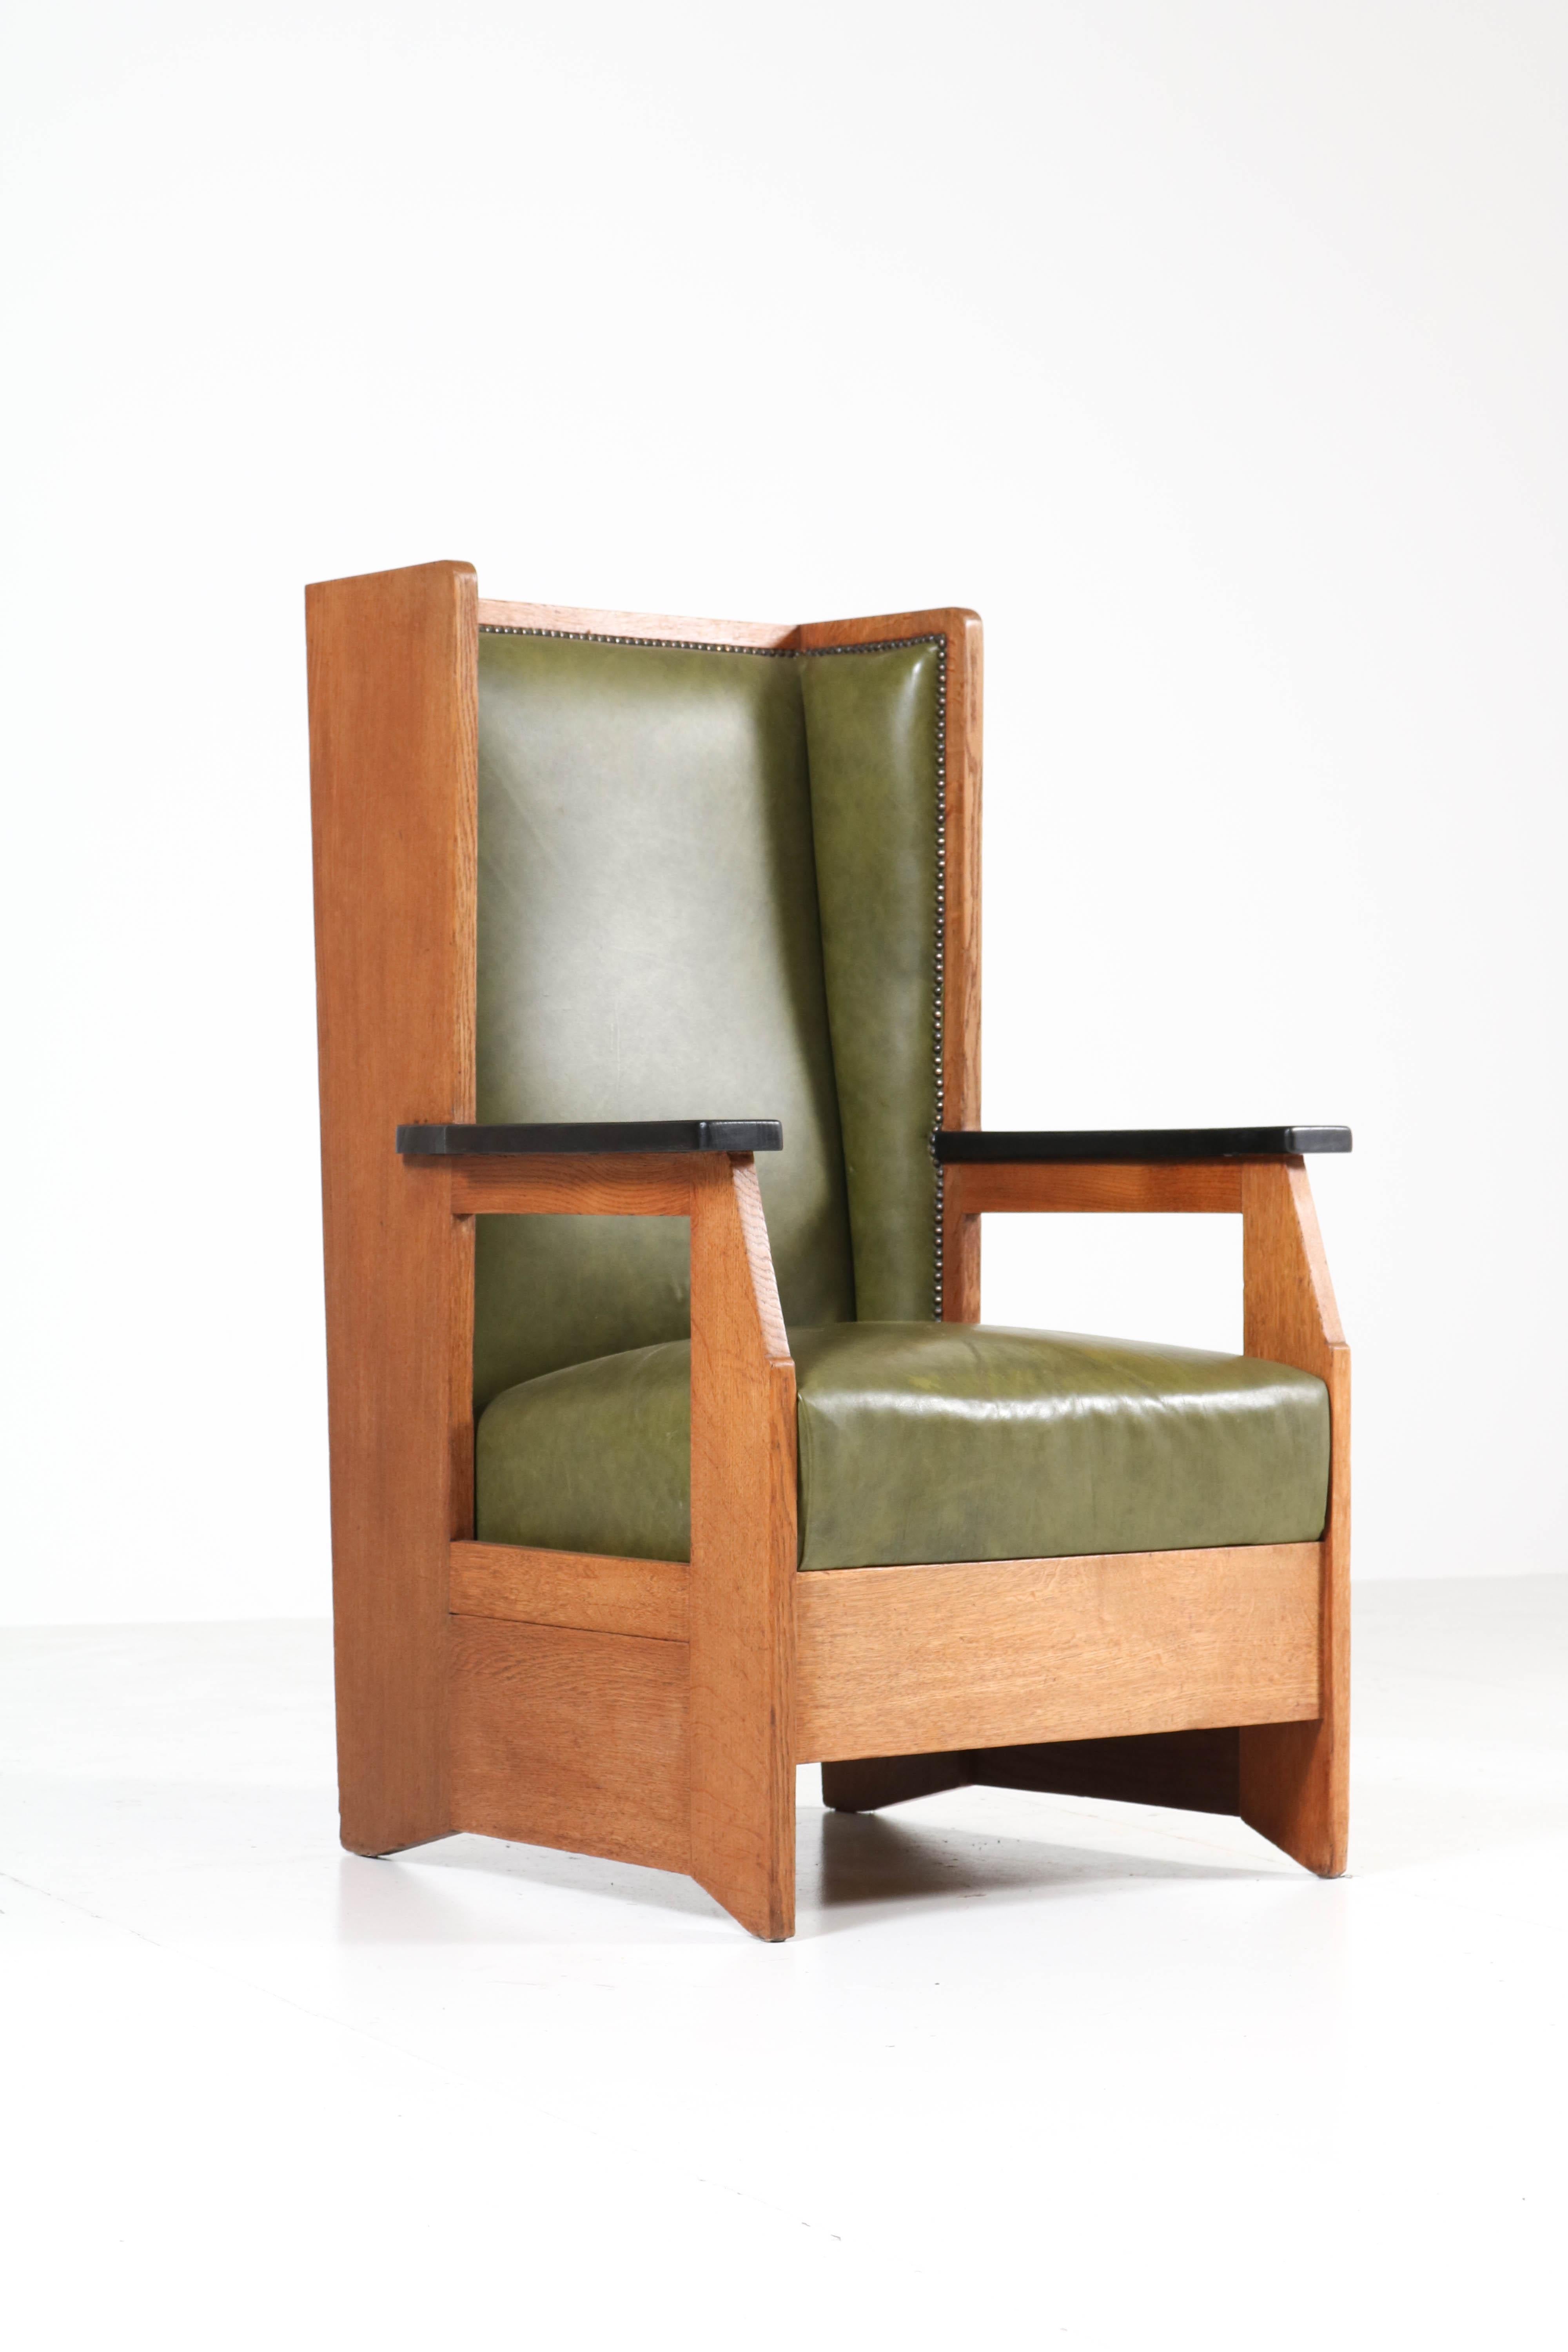 Stunning and rare Art Deco Haagse School wingback chair.
Design by Henk Wouda for Pander.
Striking Dutch design from the 1920s.
Marked with original metal tag.
Solid oak with later green leather upholstery.
In good original condition with minor